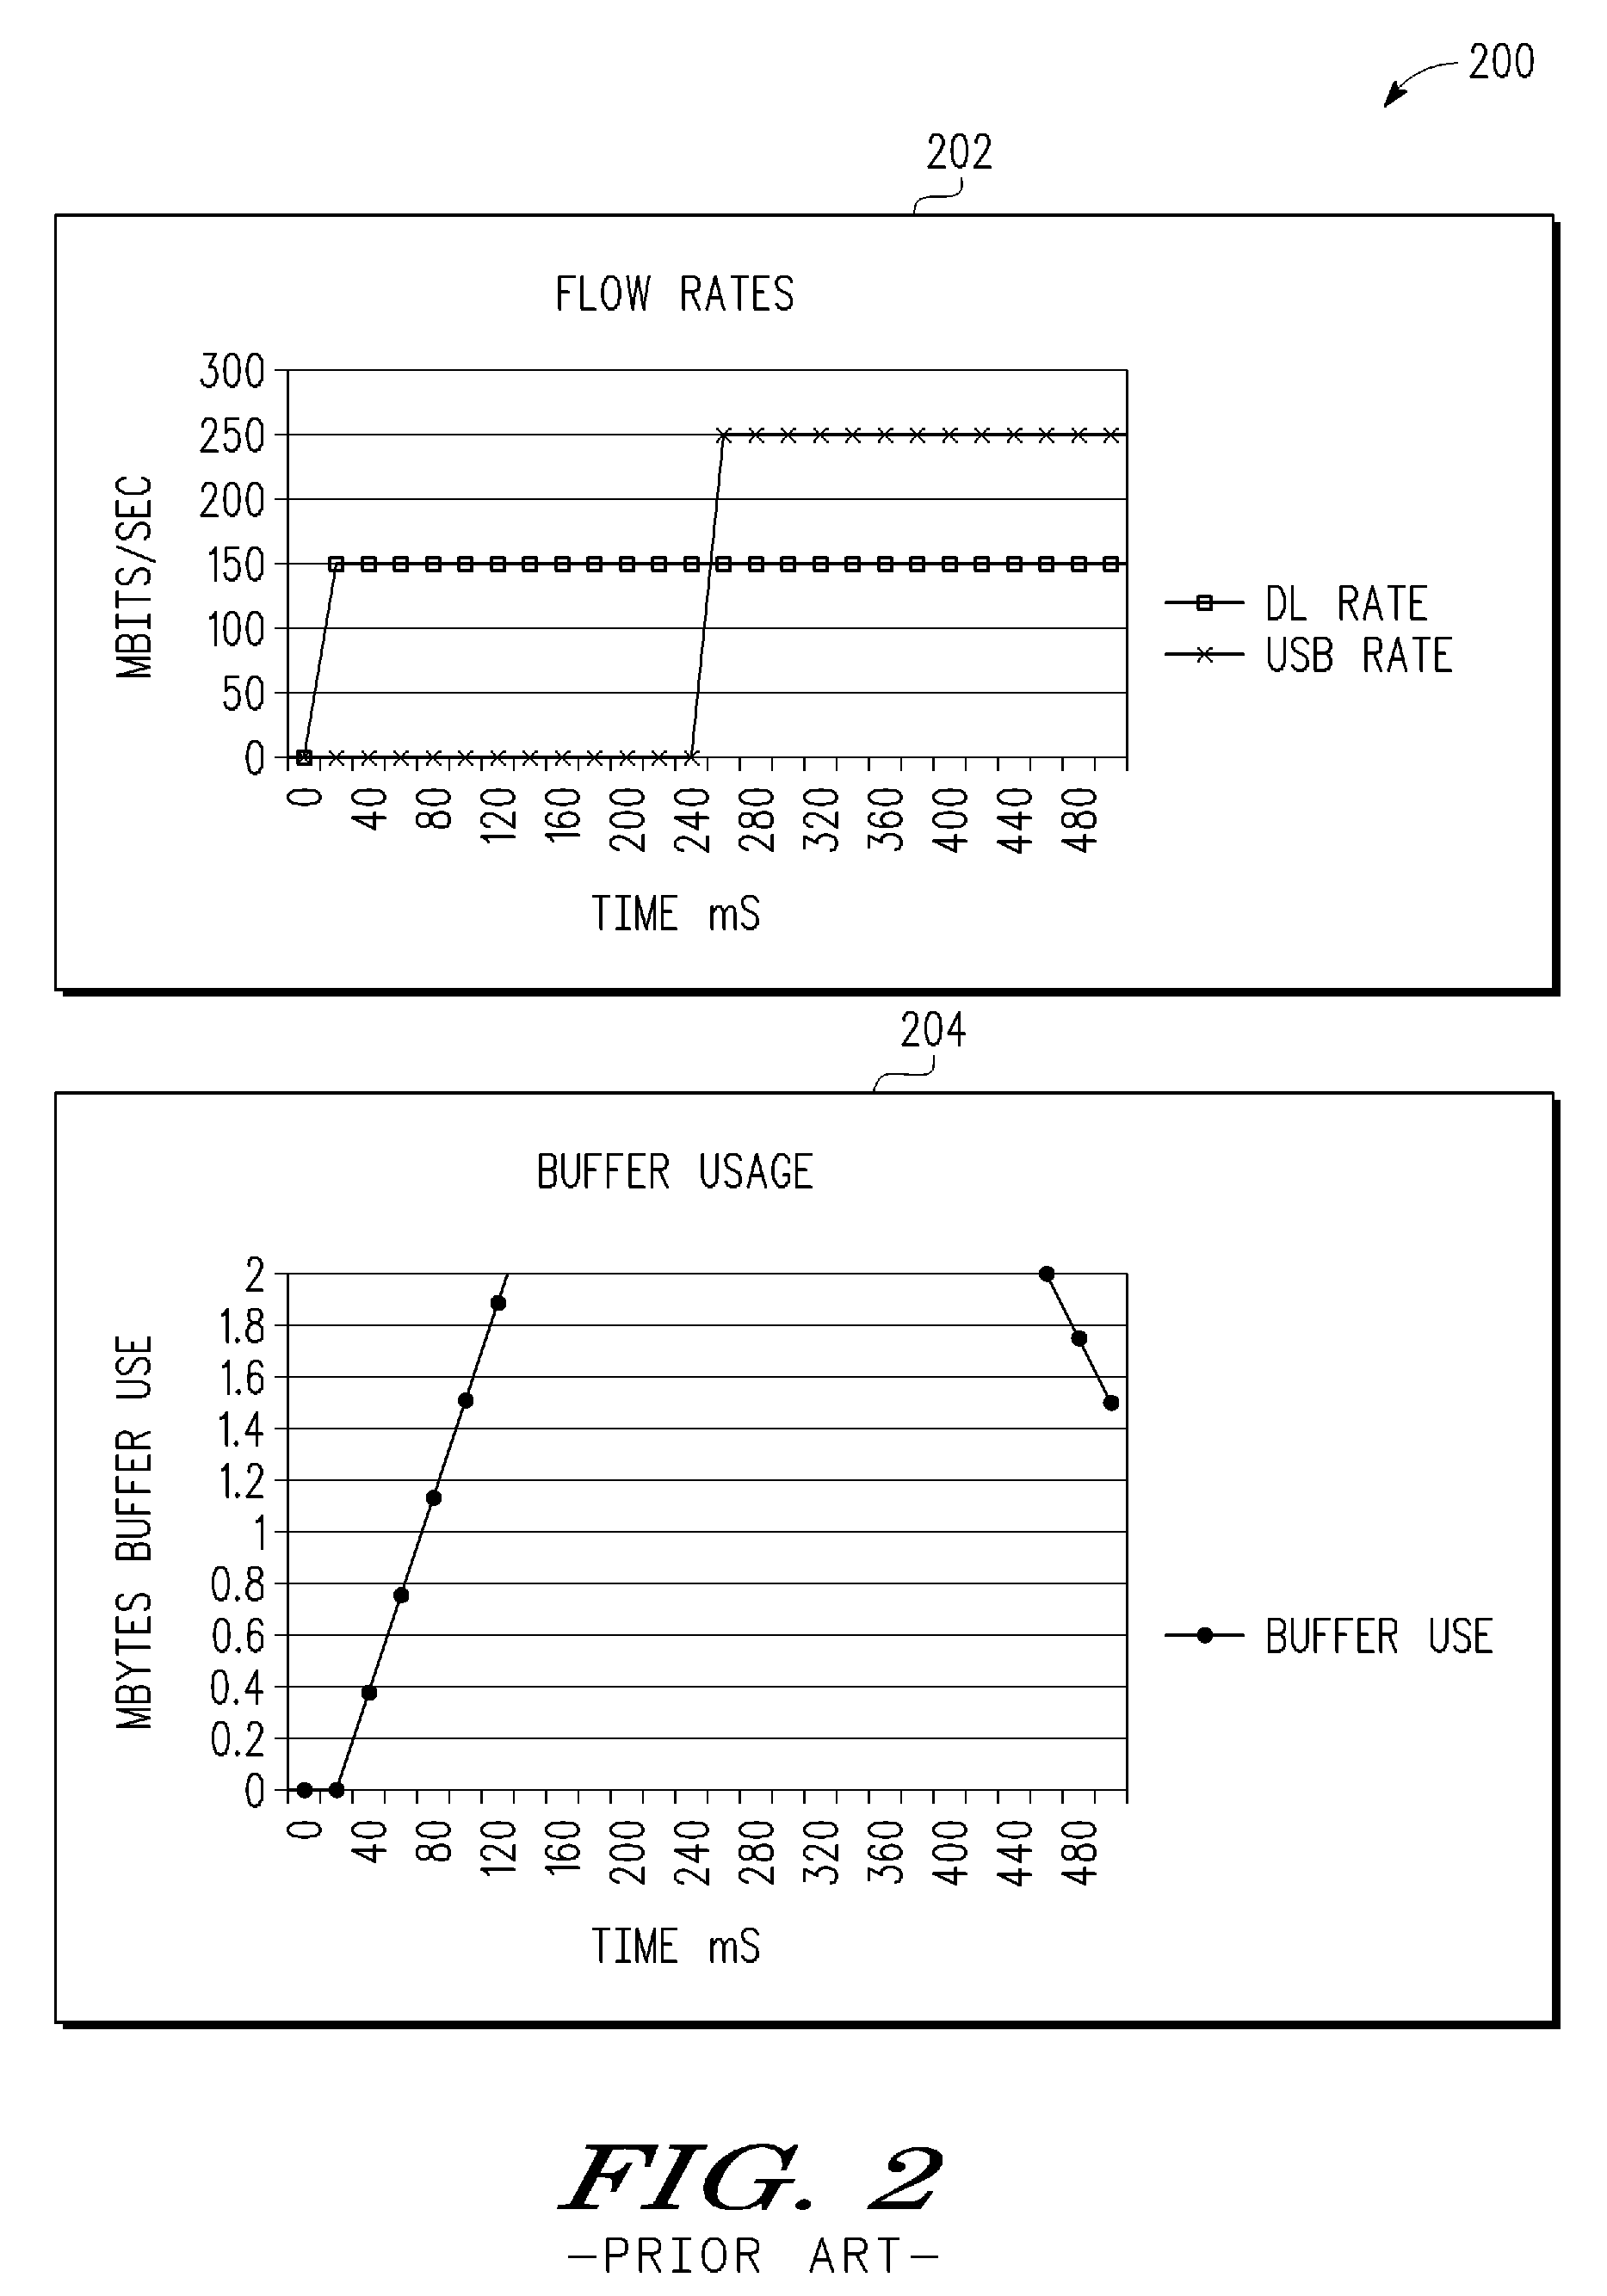 Techniques for reducing buffer overflow in a communication system